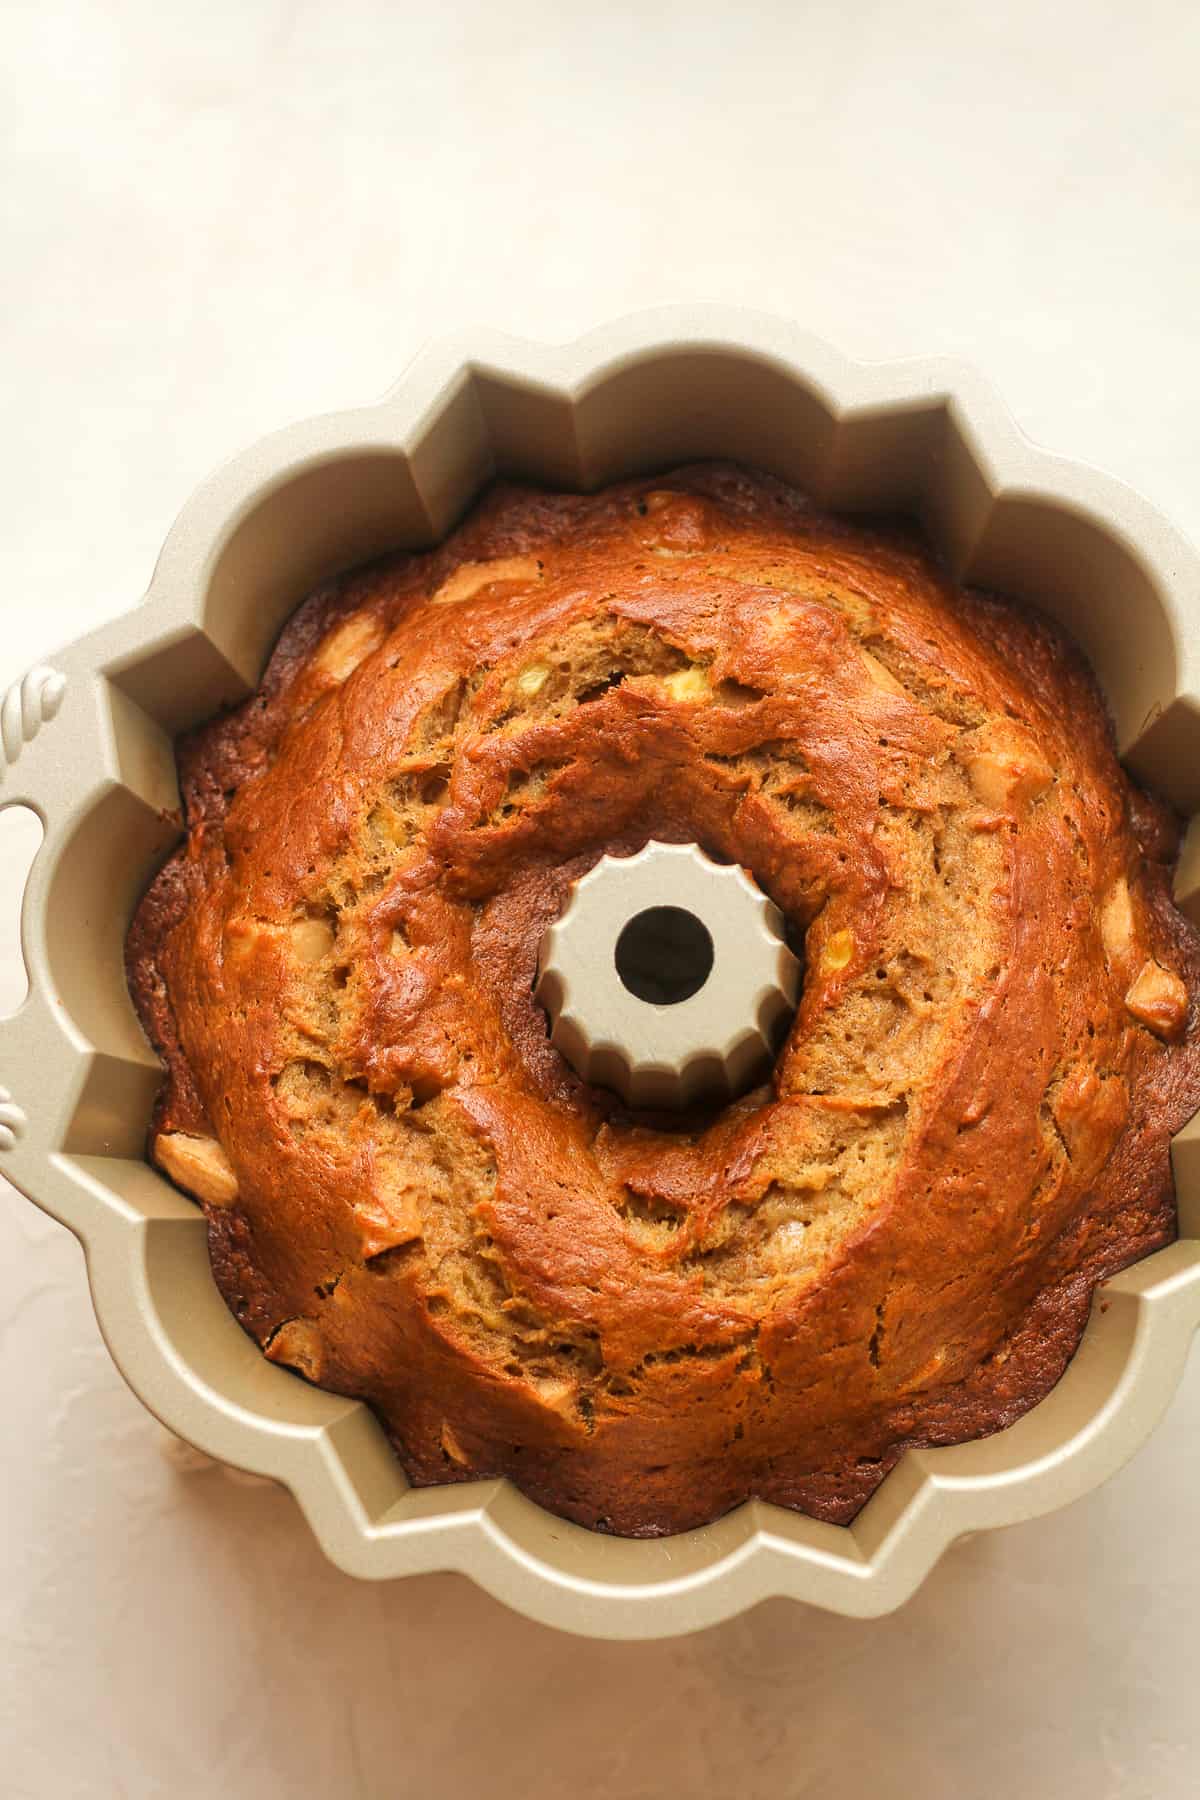 The baked cake in the bundt pan.